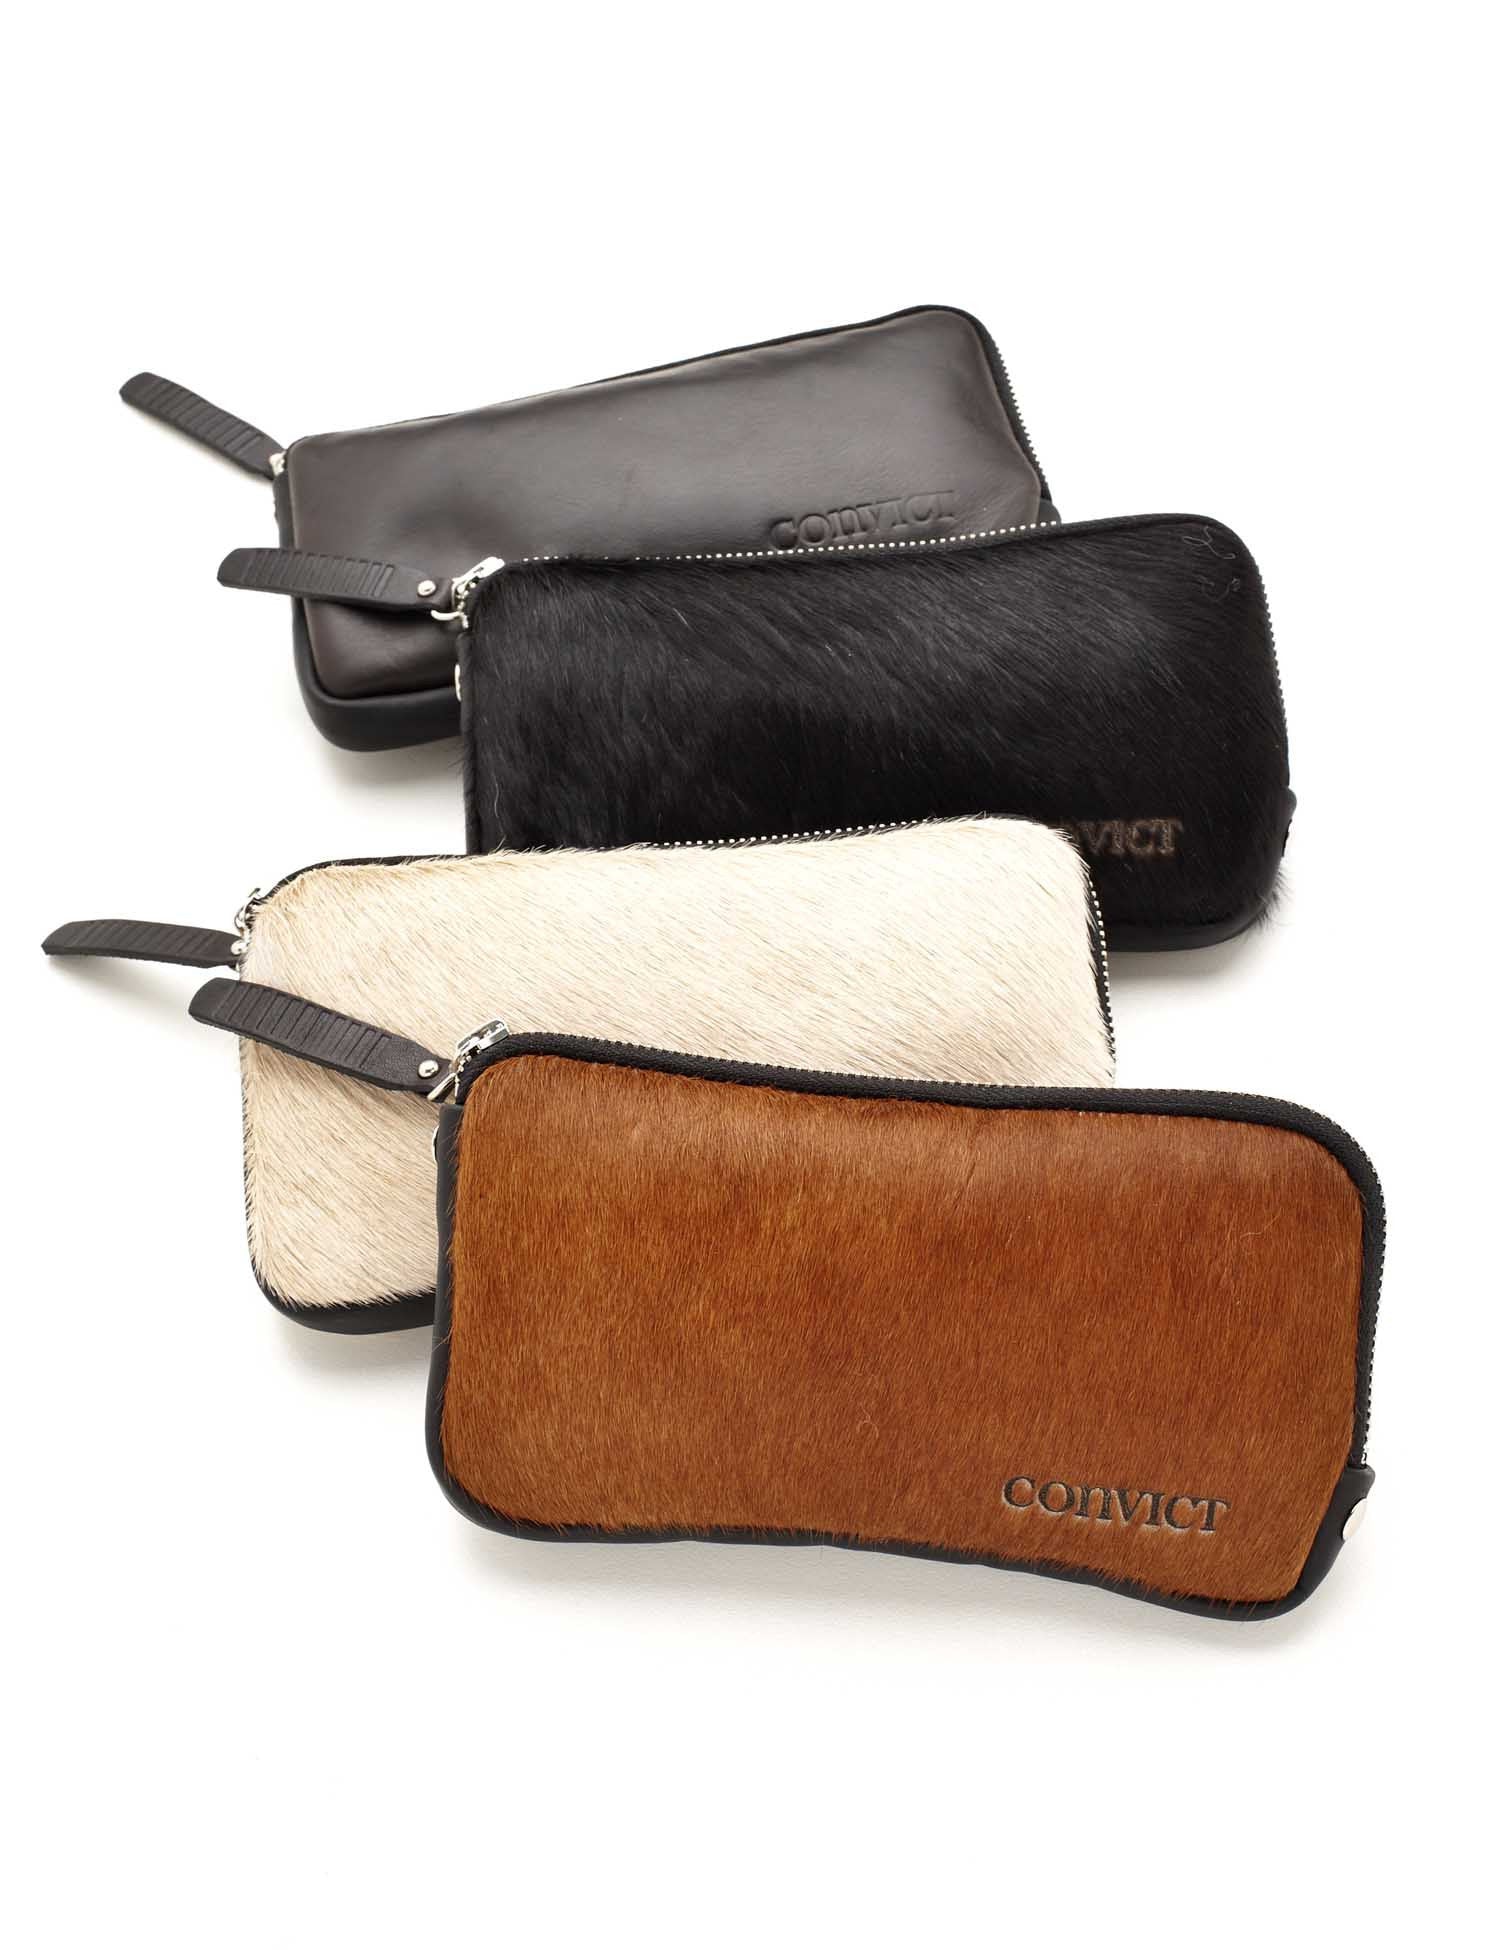 Convict brown cowhide womens wallet